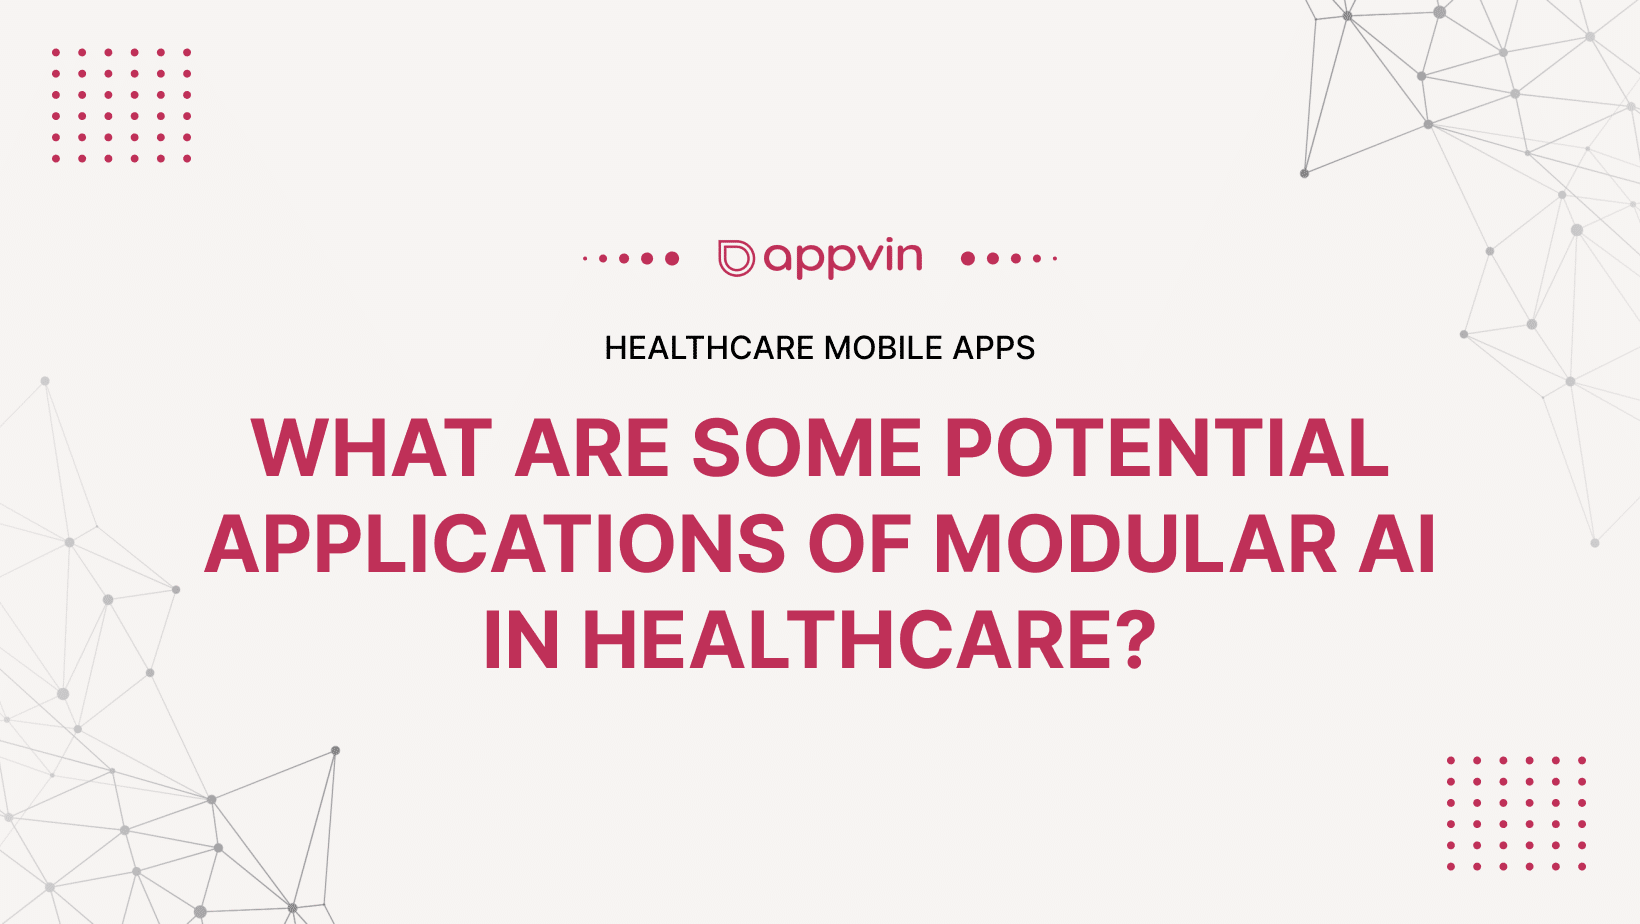 What are some potential applications of modular AI in healthcare?